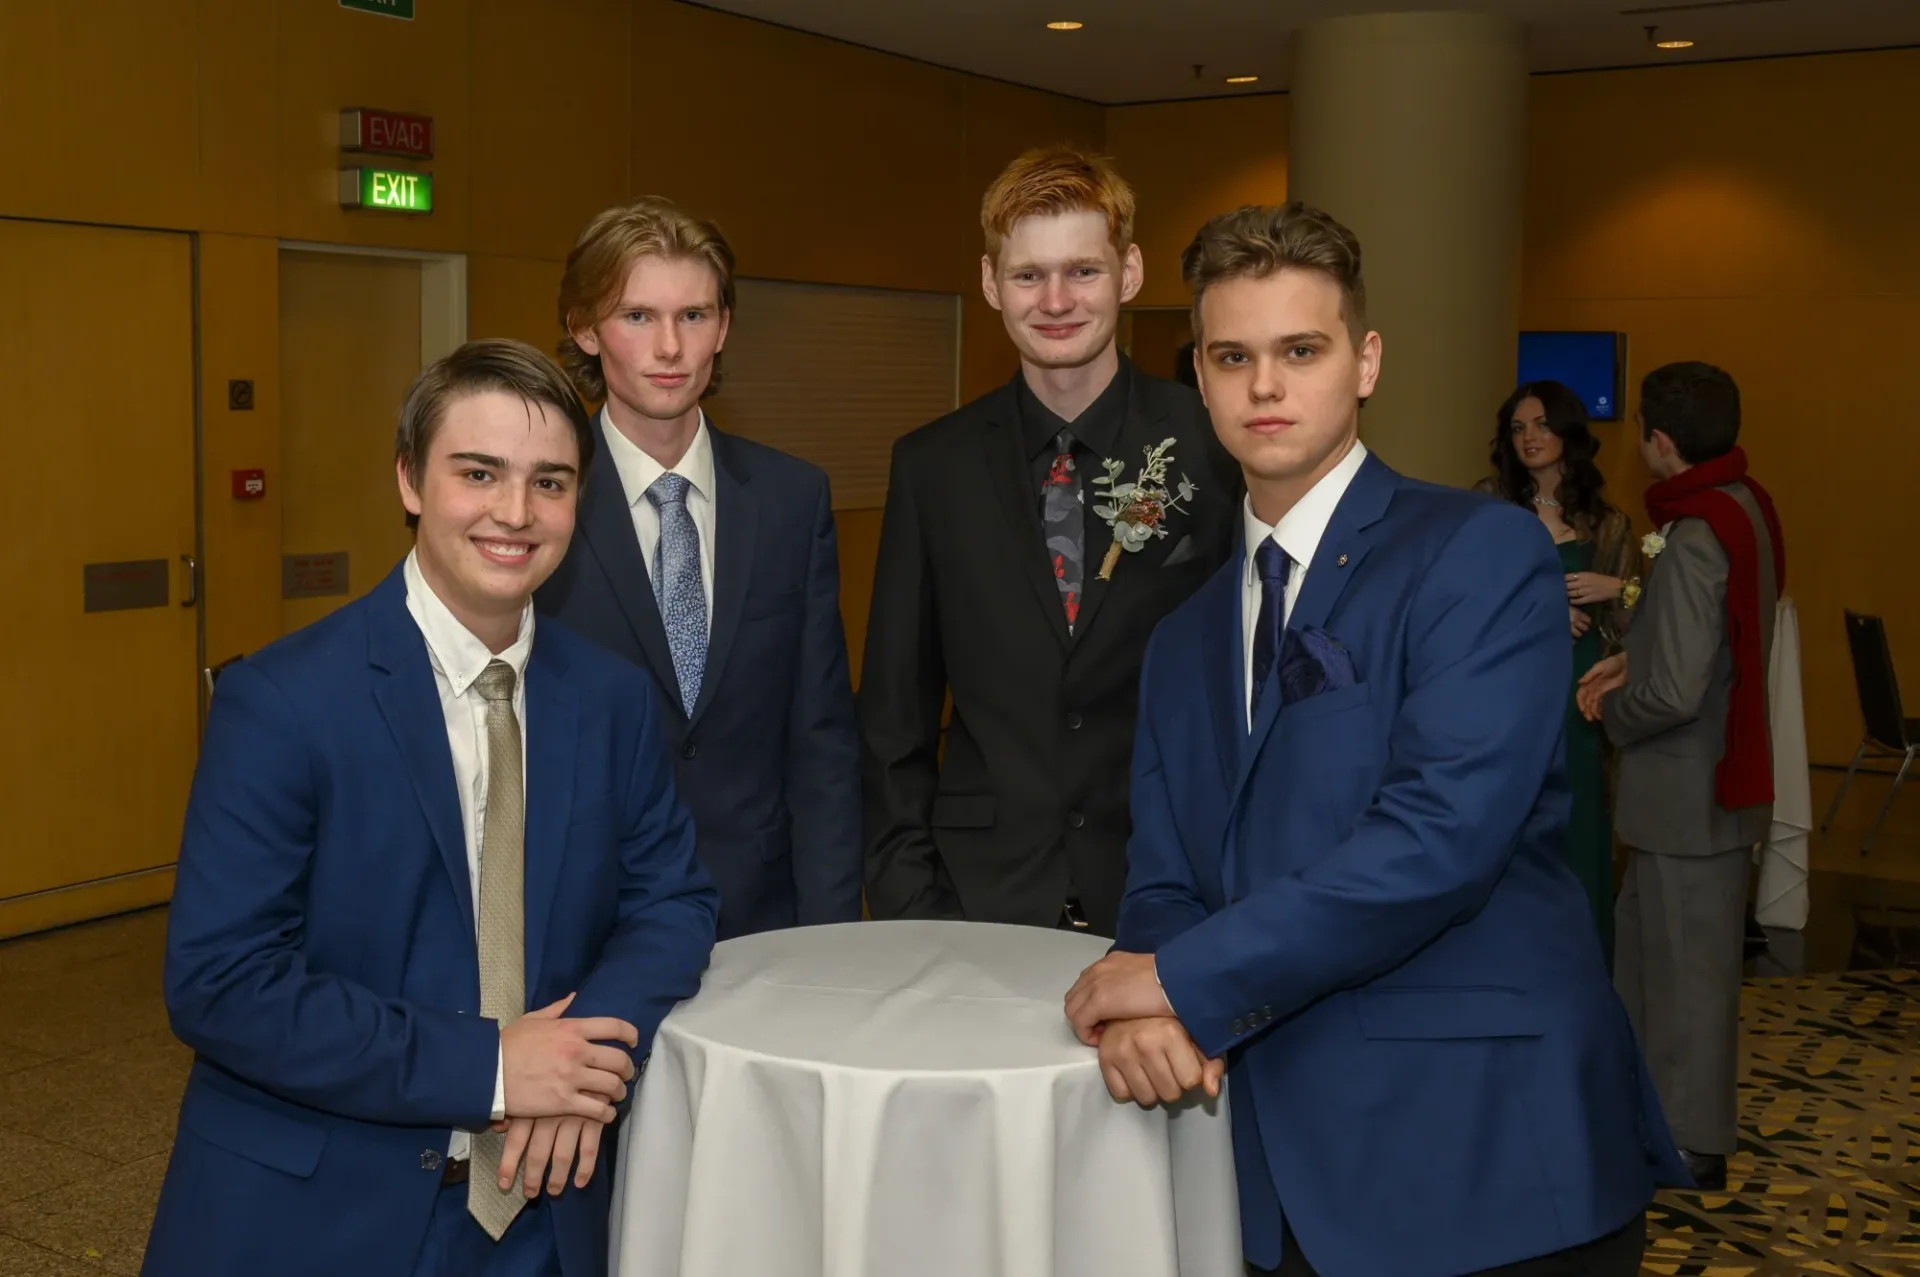 Students attending the Year 12 ball at Mazenod College Perth WA.